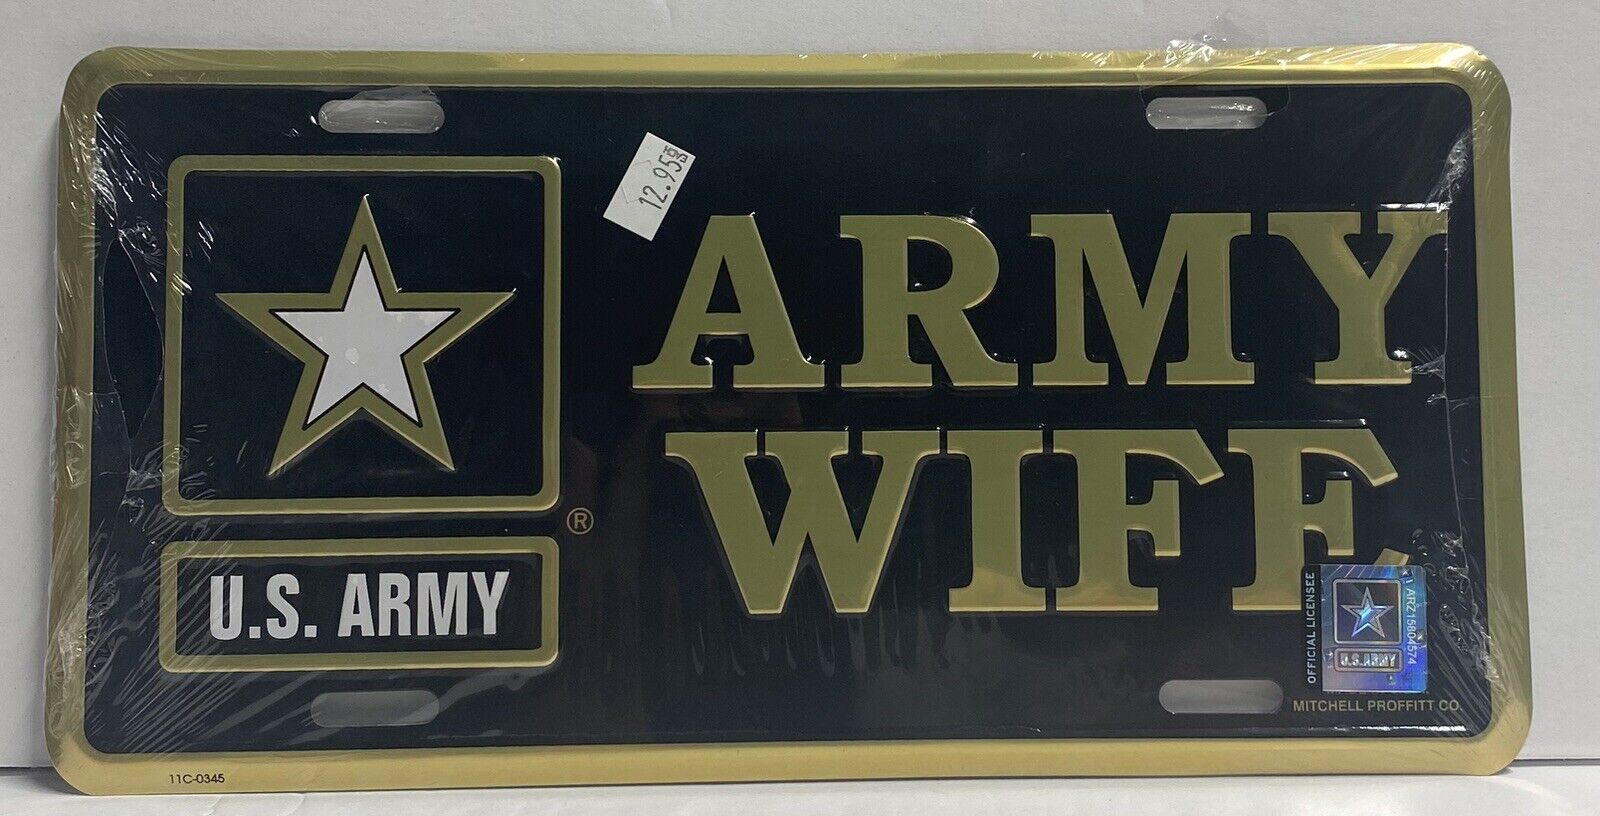 Army wife lone star military logo license plate usa made